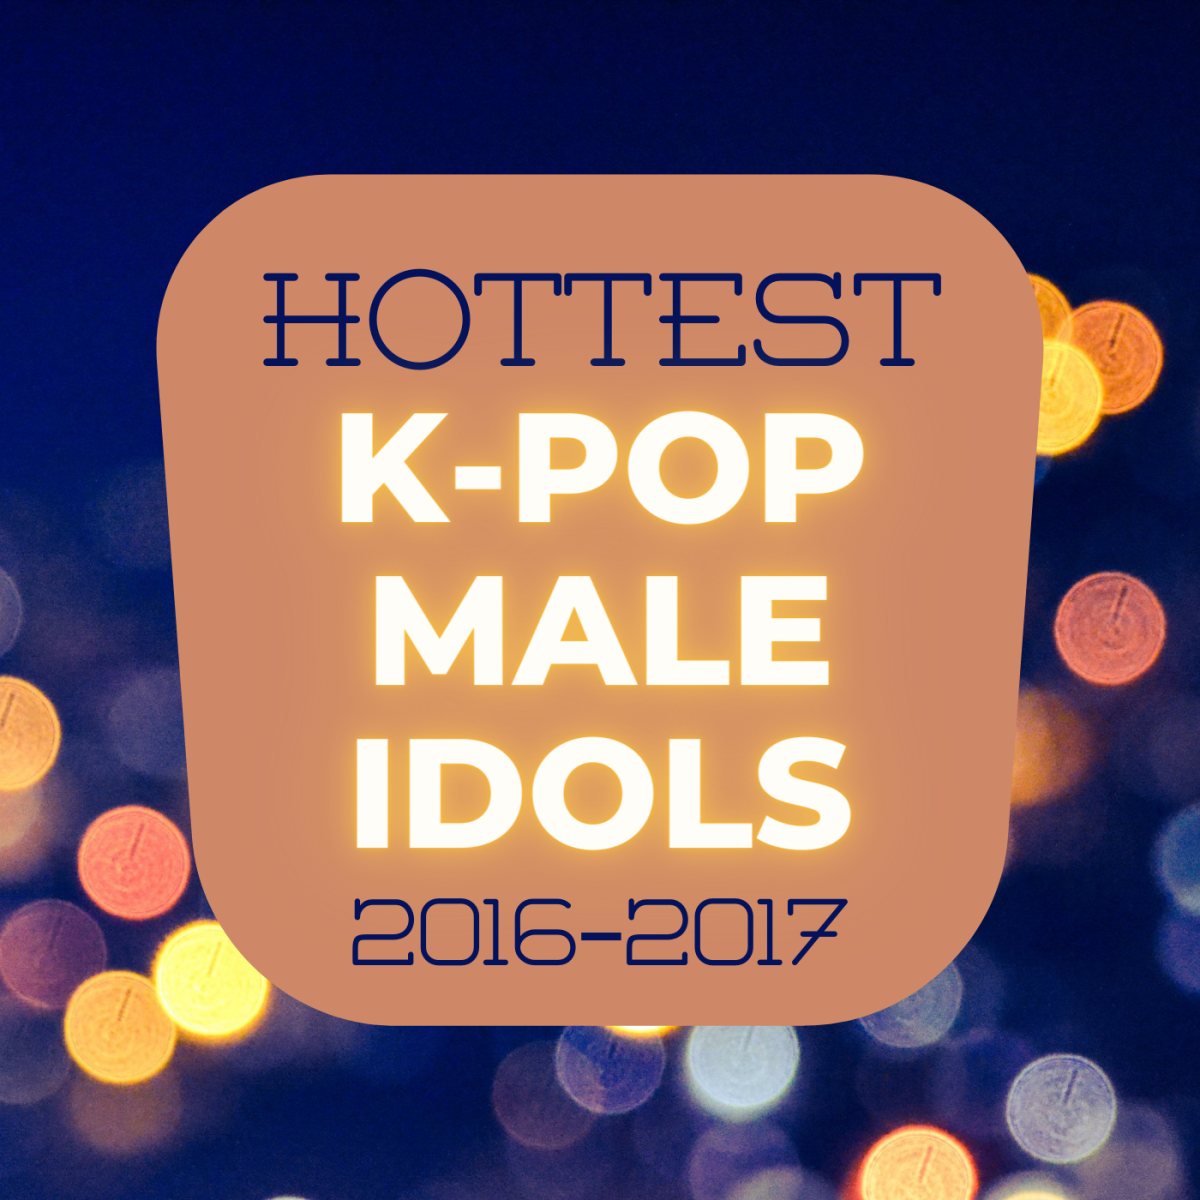 Who were the most handsome K-pop idols of 2016 and 2017? Check out our top 10 list!